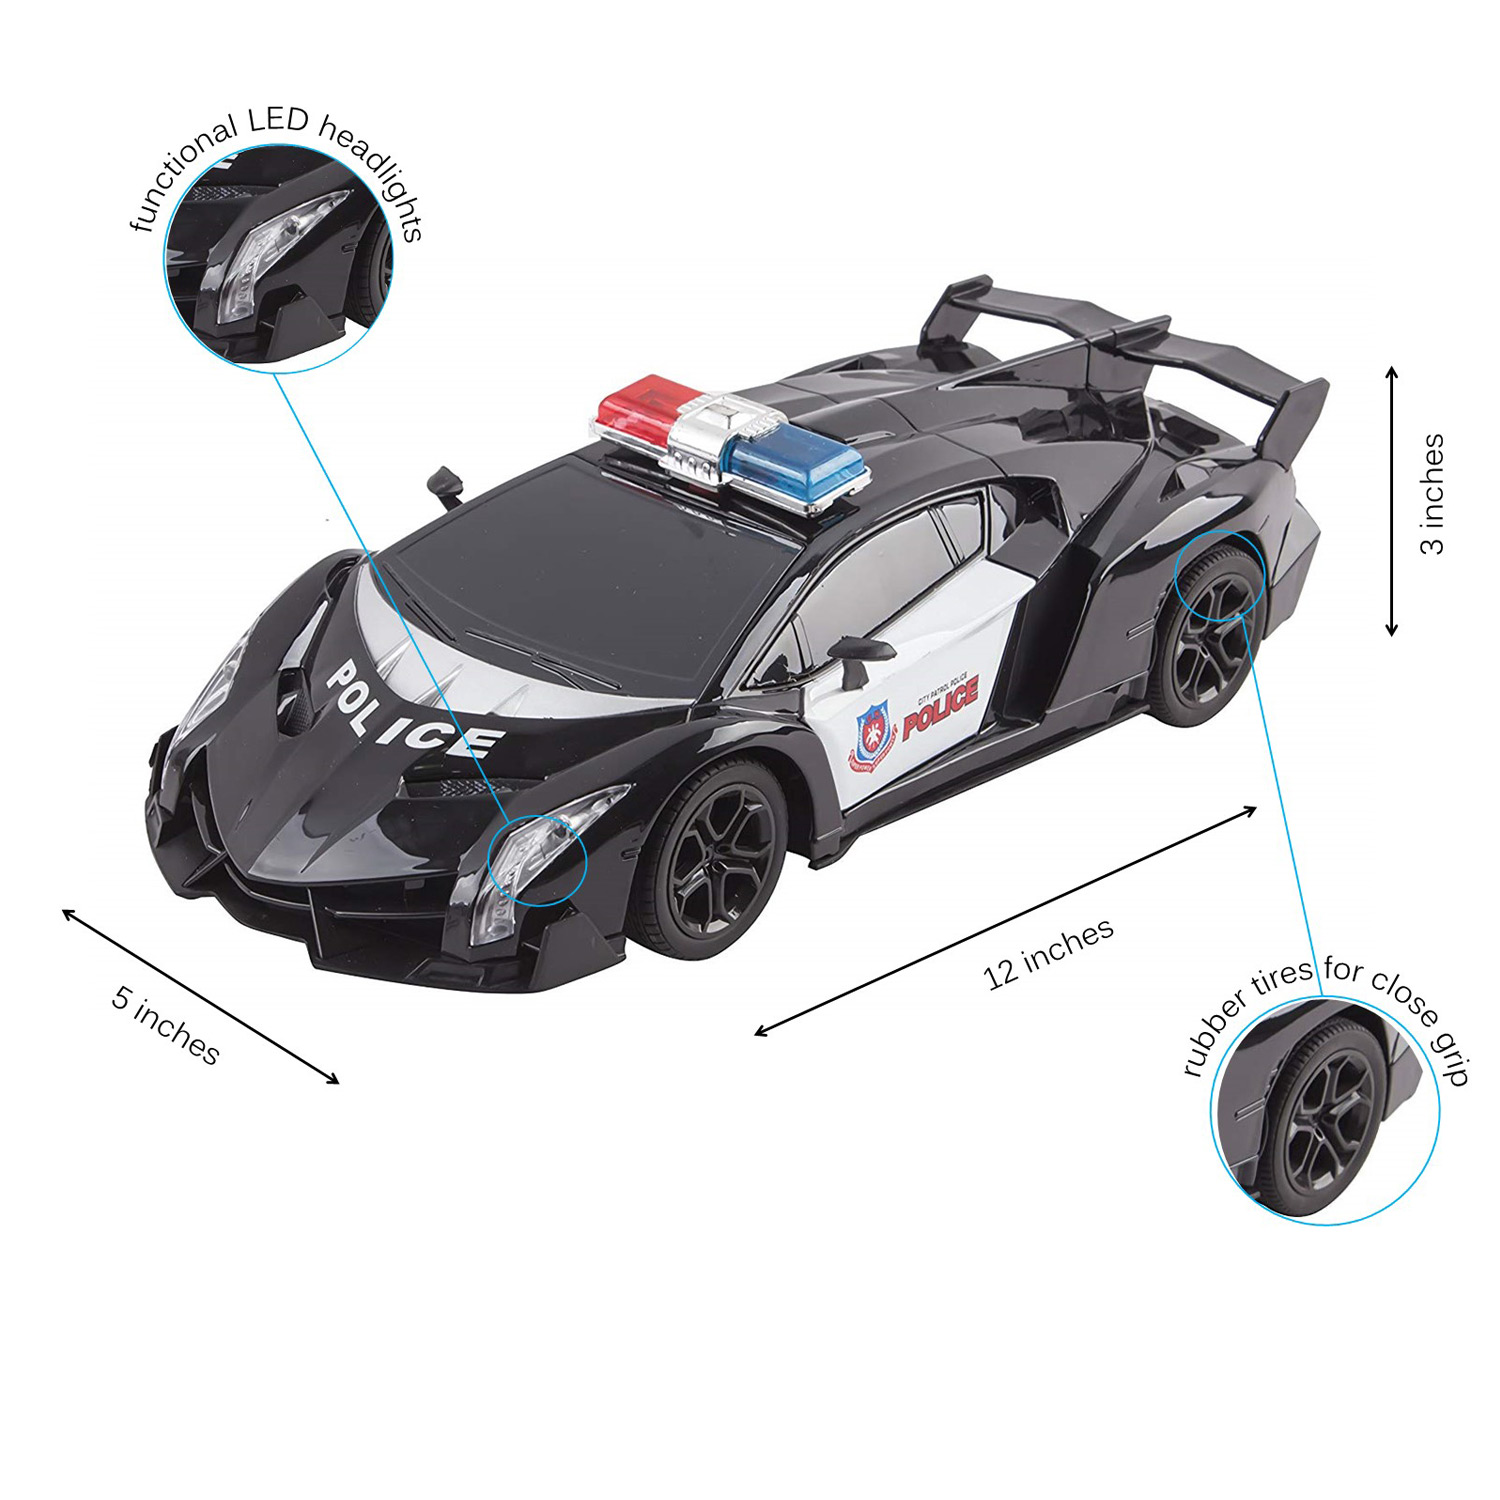 Shop Police 1:16 Car Toy with Lights Online